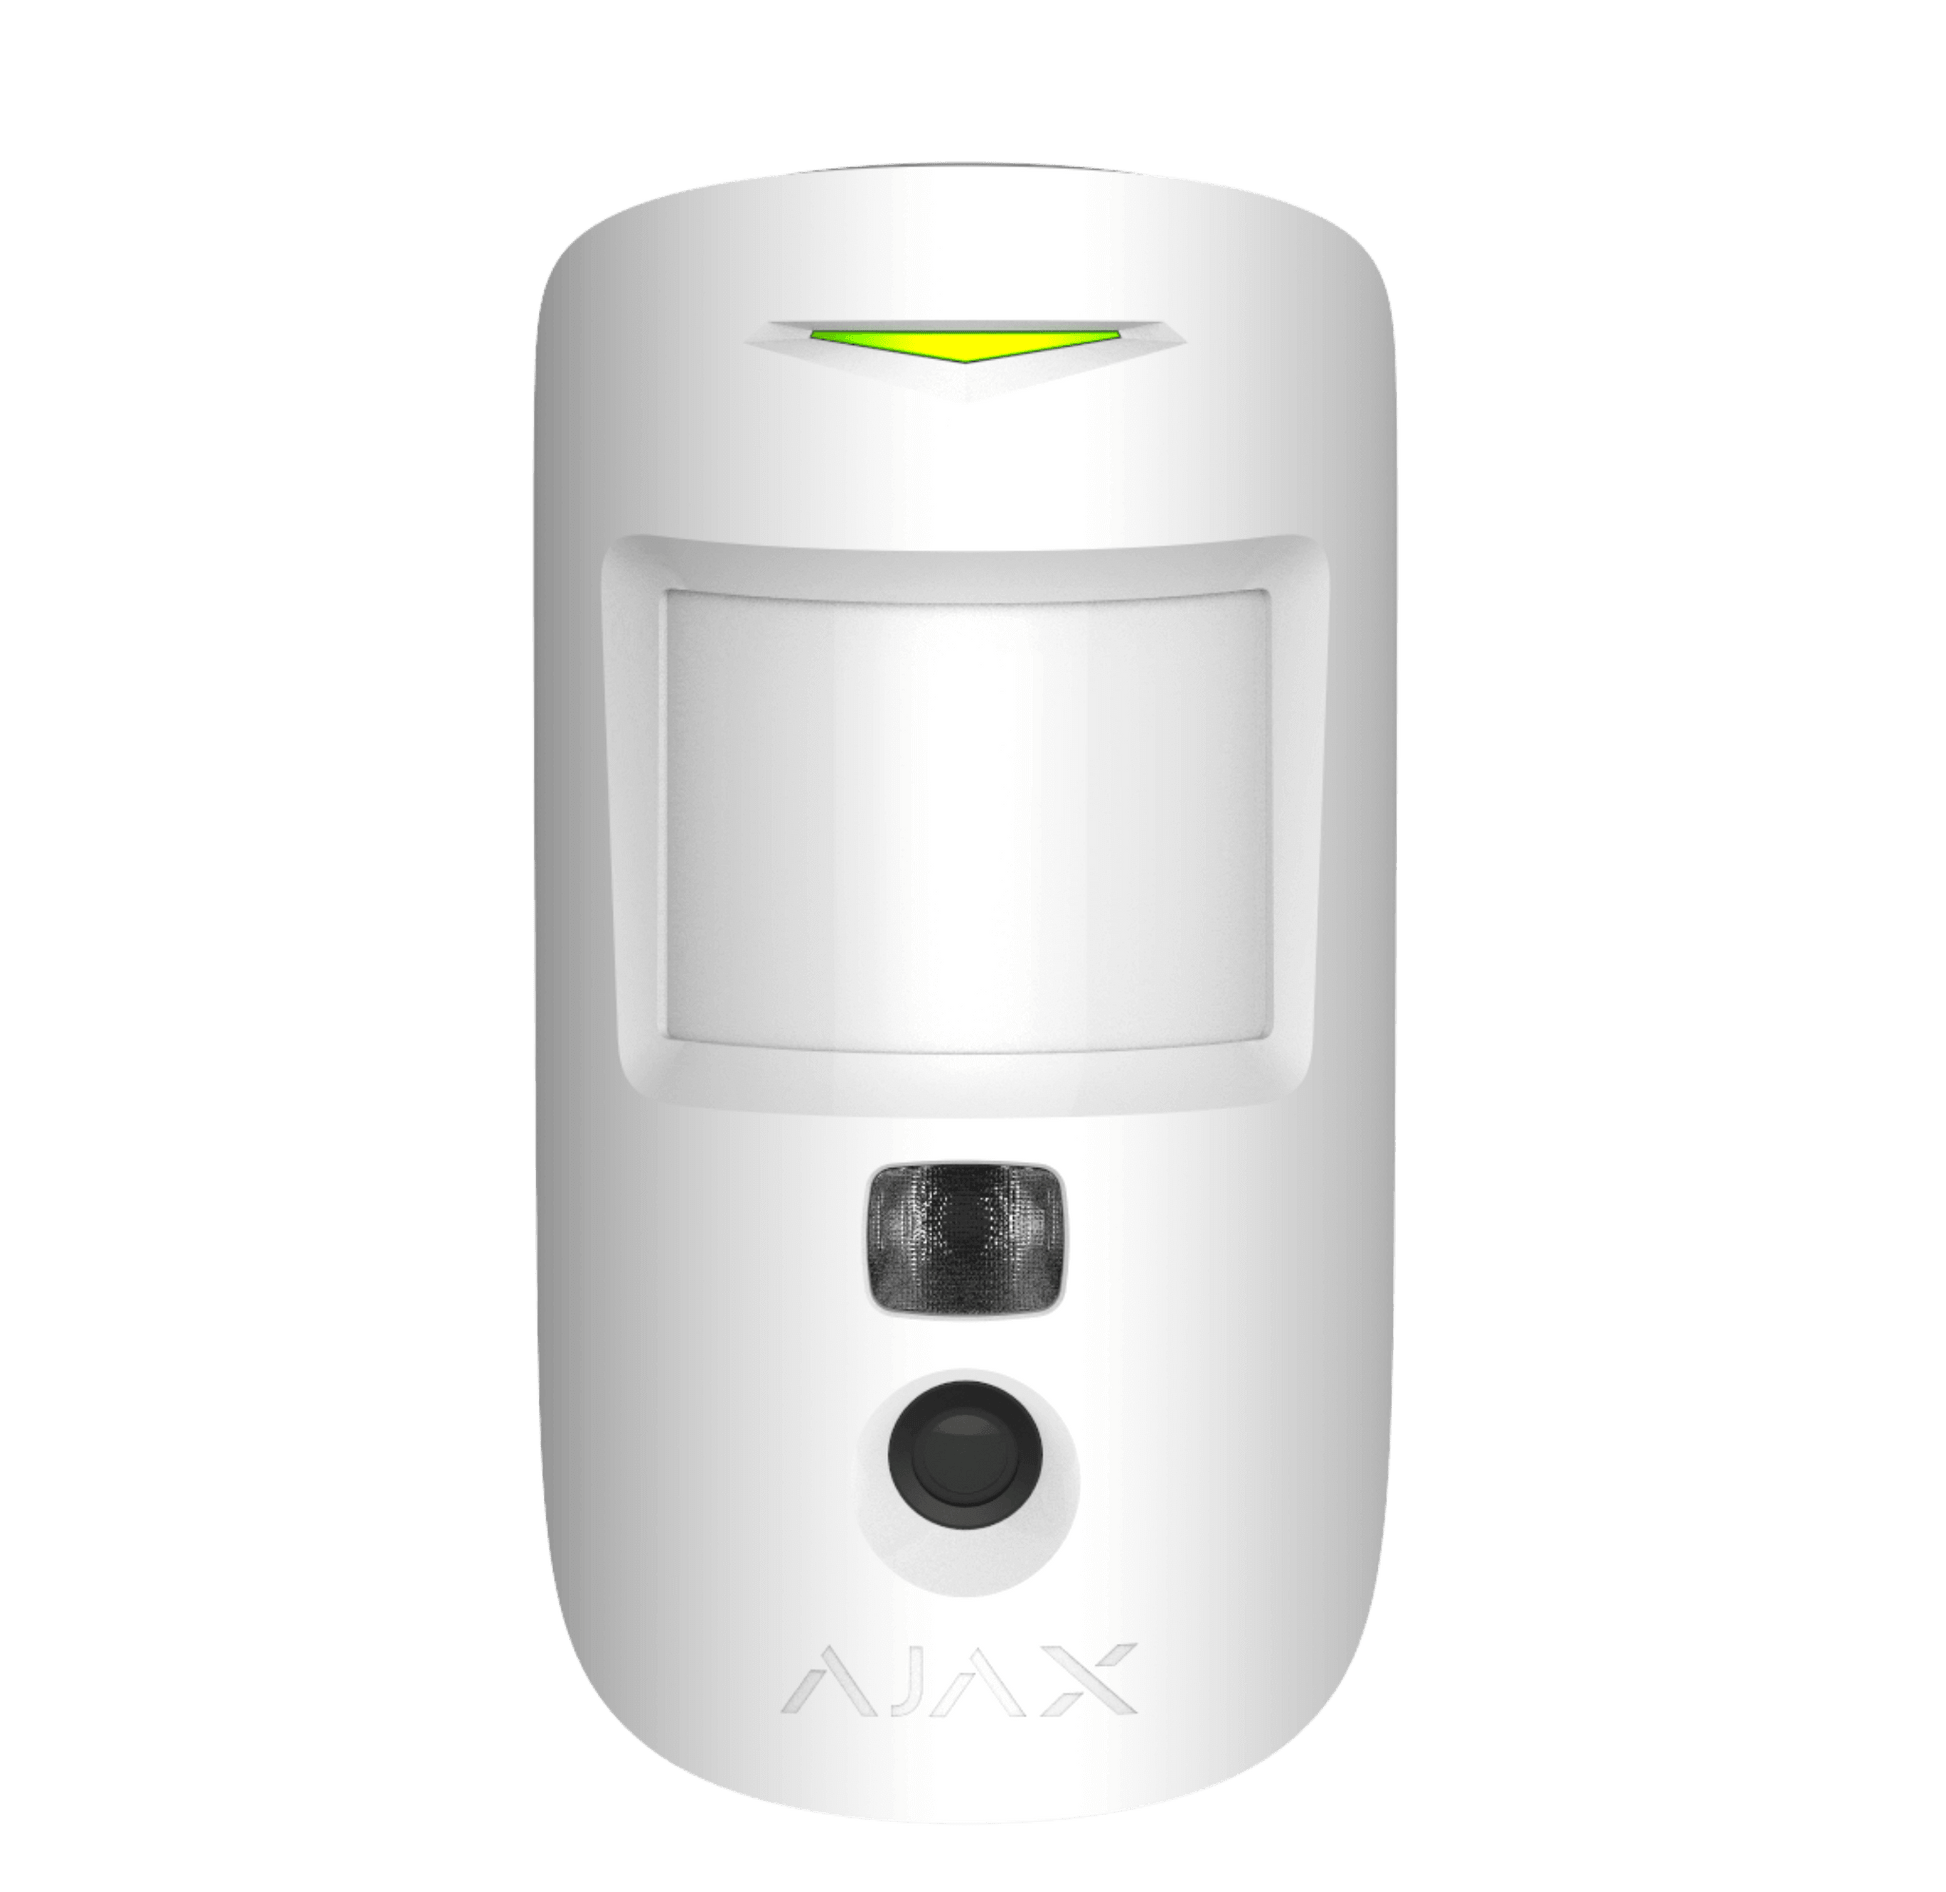 White Ajax MotionCam (PhoD) a wireless motion detector with a built in camera for home and business security, 110 × 65 × 50 mm in size, 86 grams in weight. front view of device